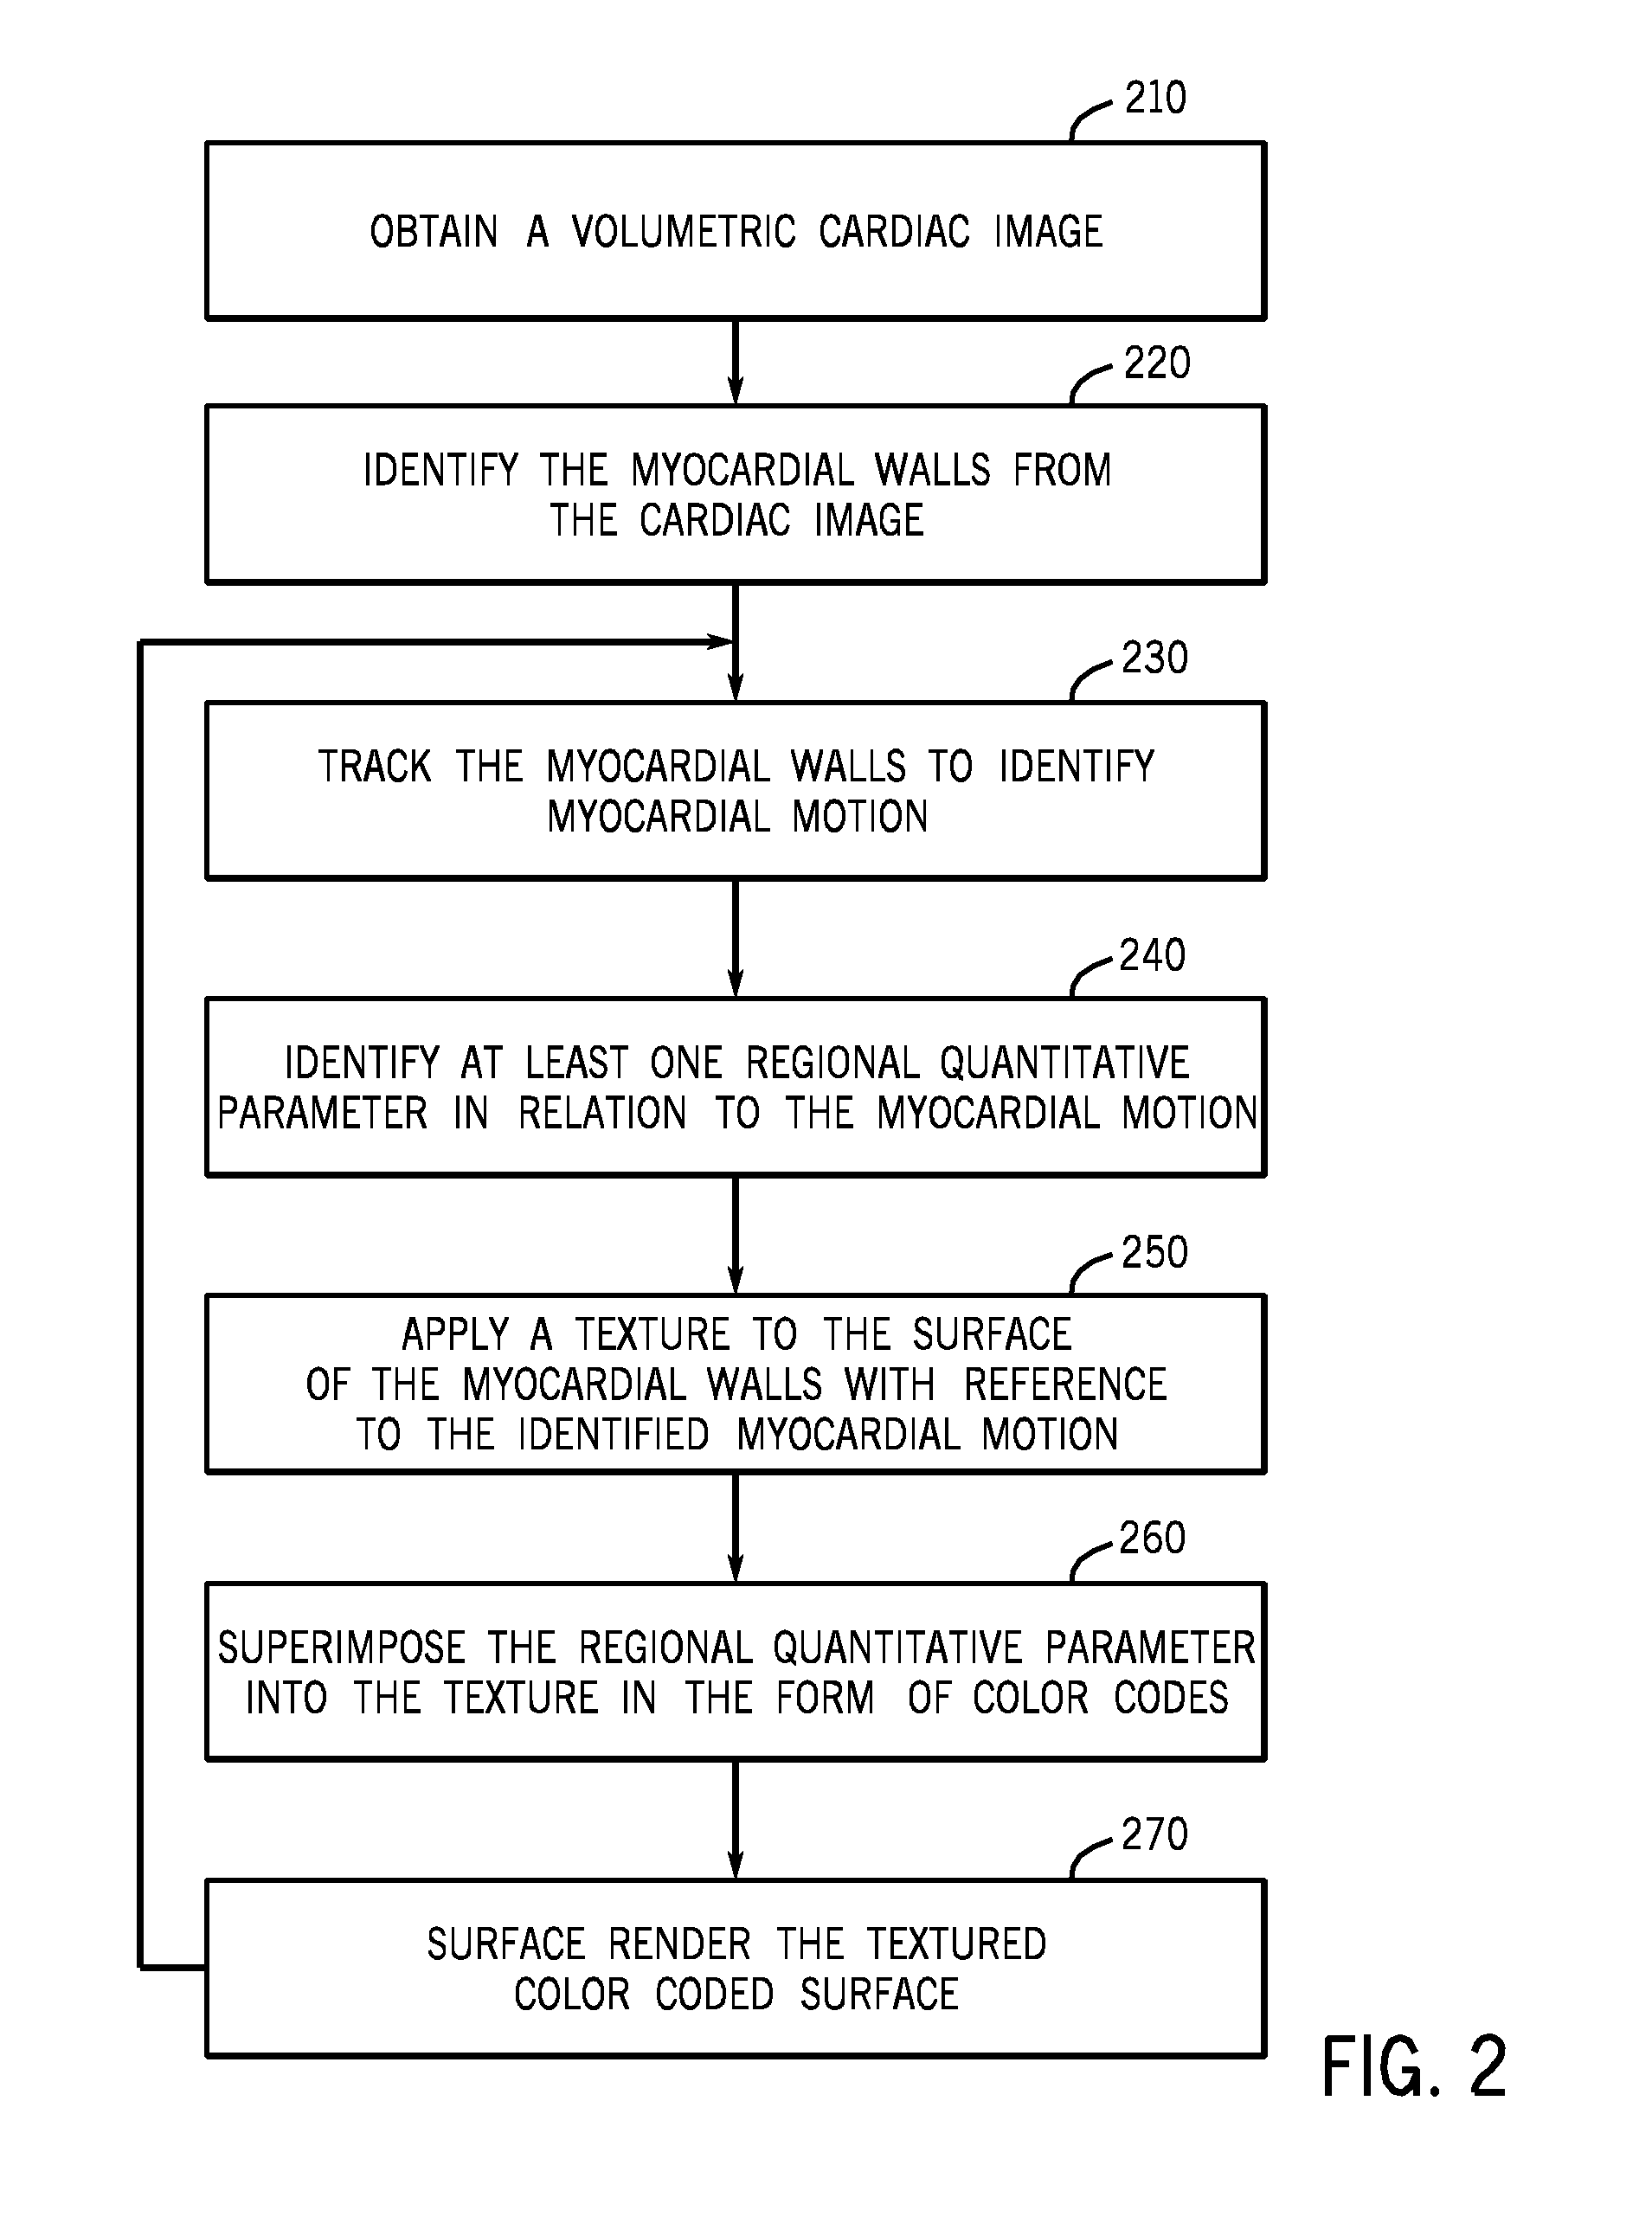 Methods and apparatus for combined 4d presentation of quantitative regional parameters on surface rendering